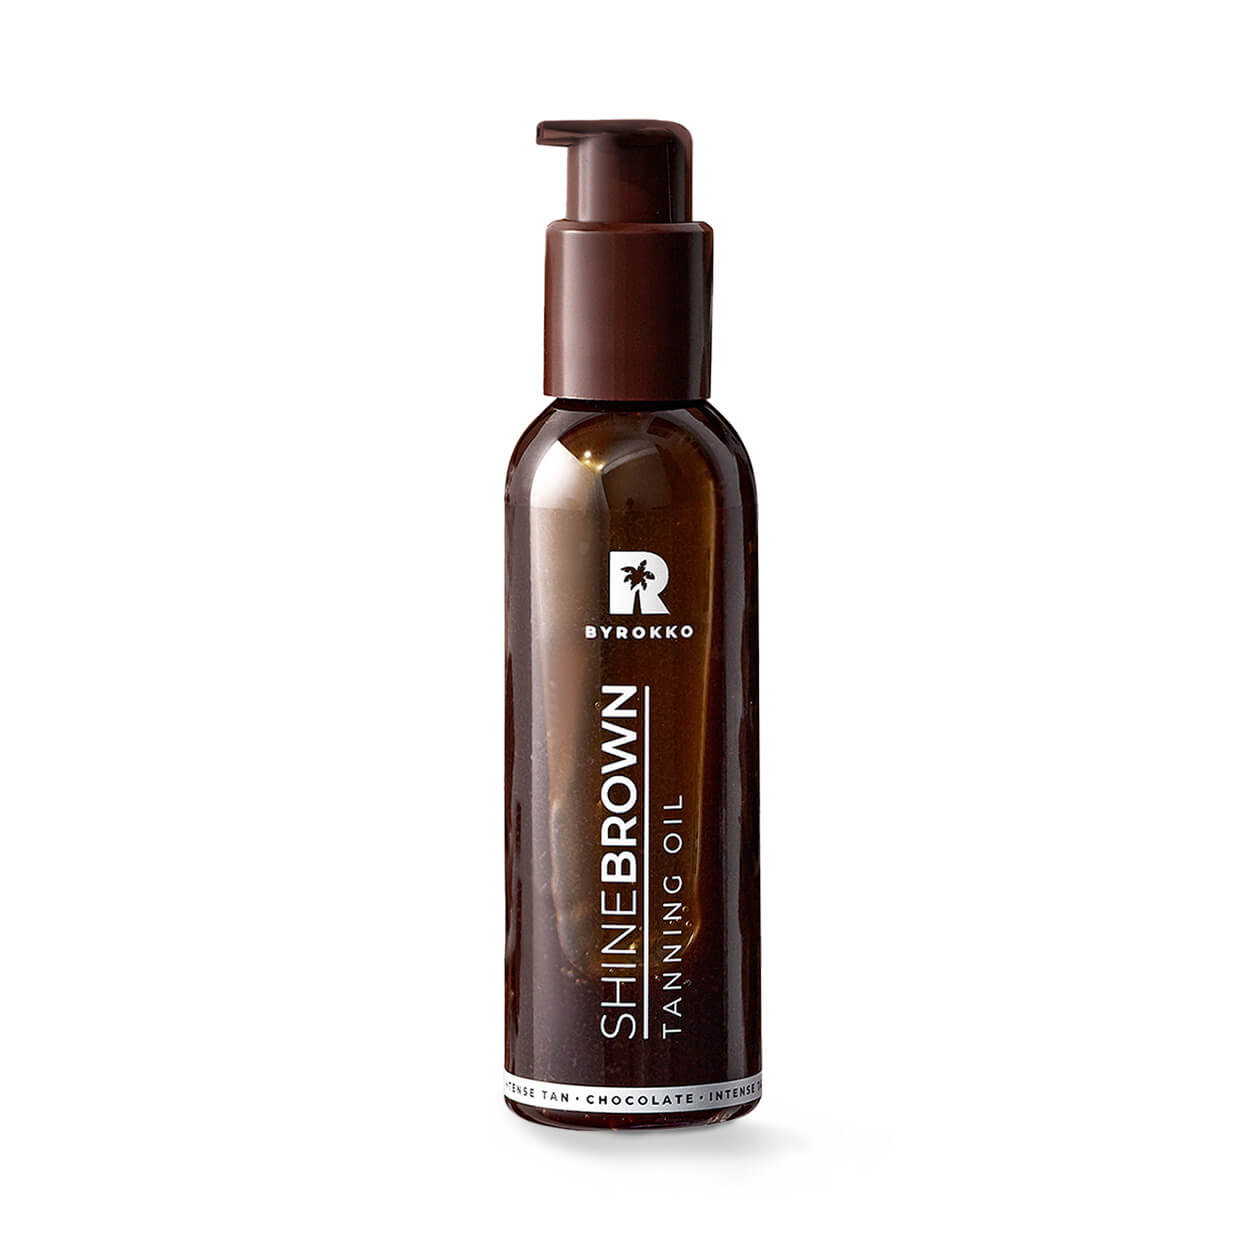 Shine brown chocolate oil for a gorgeous tan and moisturized skin.